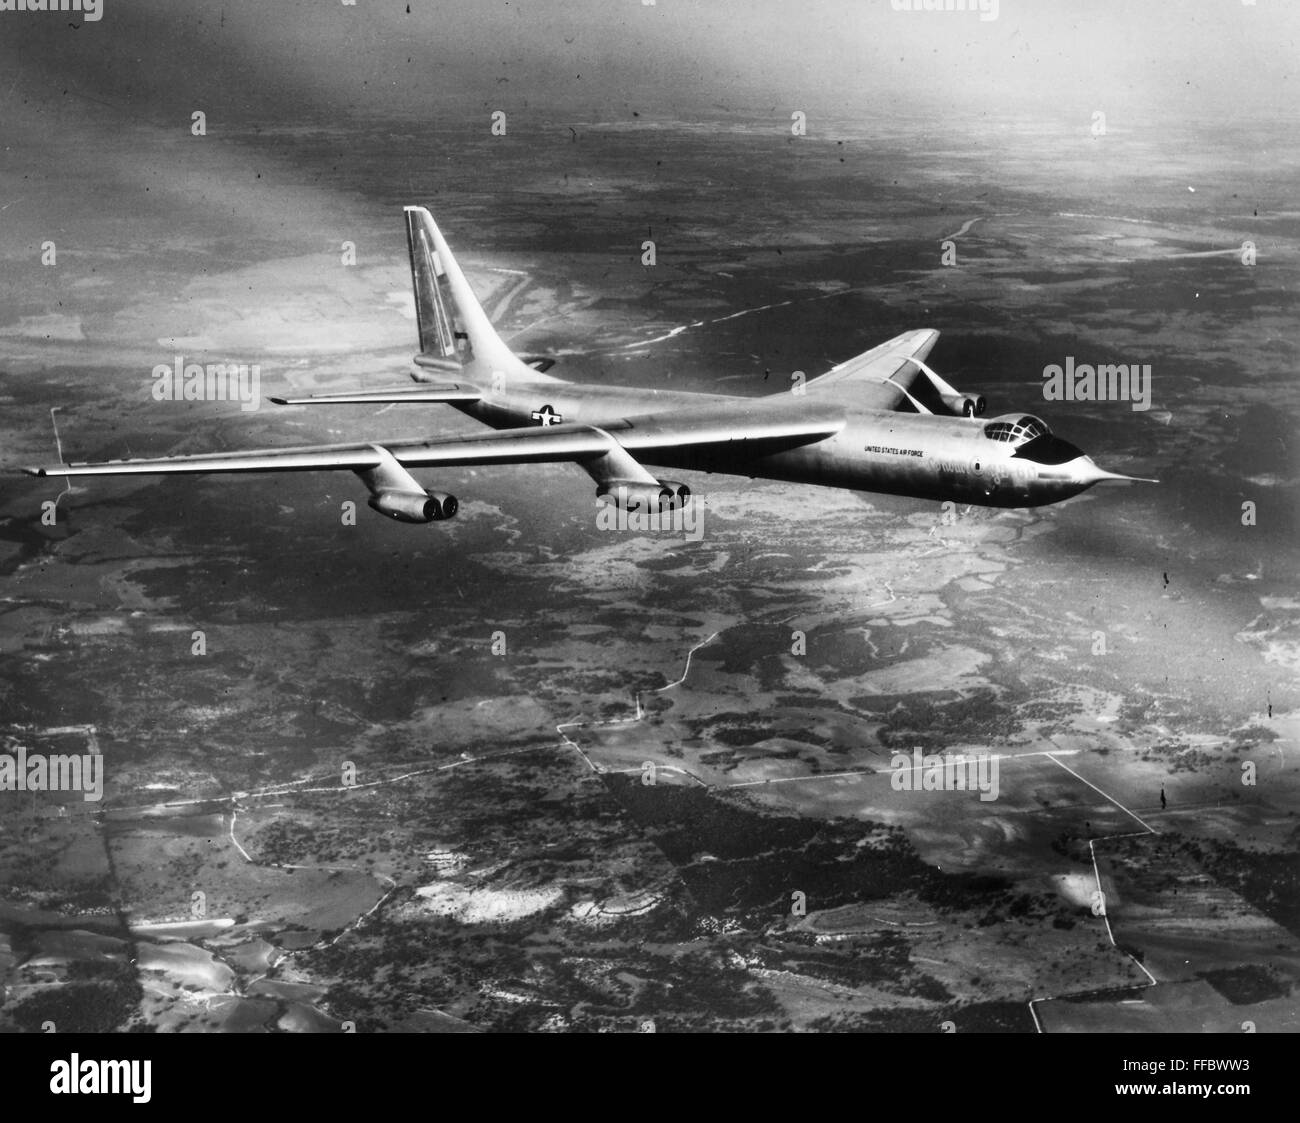 CONVAIR YB-60, 1952. /nThe Convair YB-60, an American bomber aircraft prototype, during a test flight at Carswell Air Force Base in Fort Worth, Texas, 1952. Stock Photo